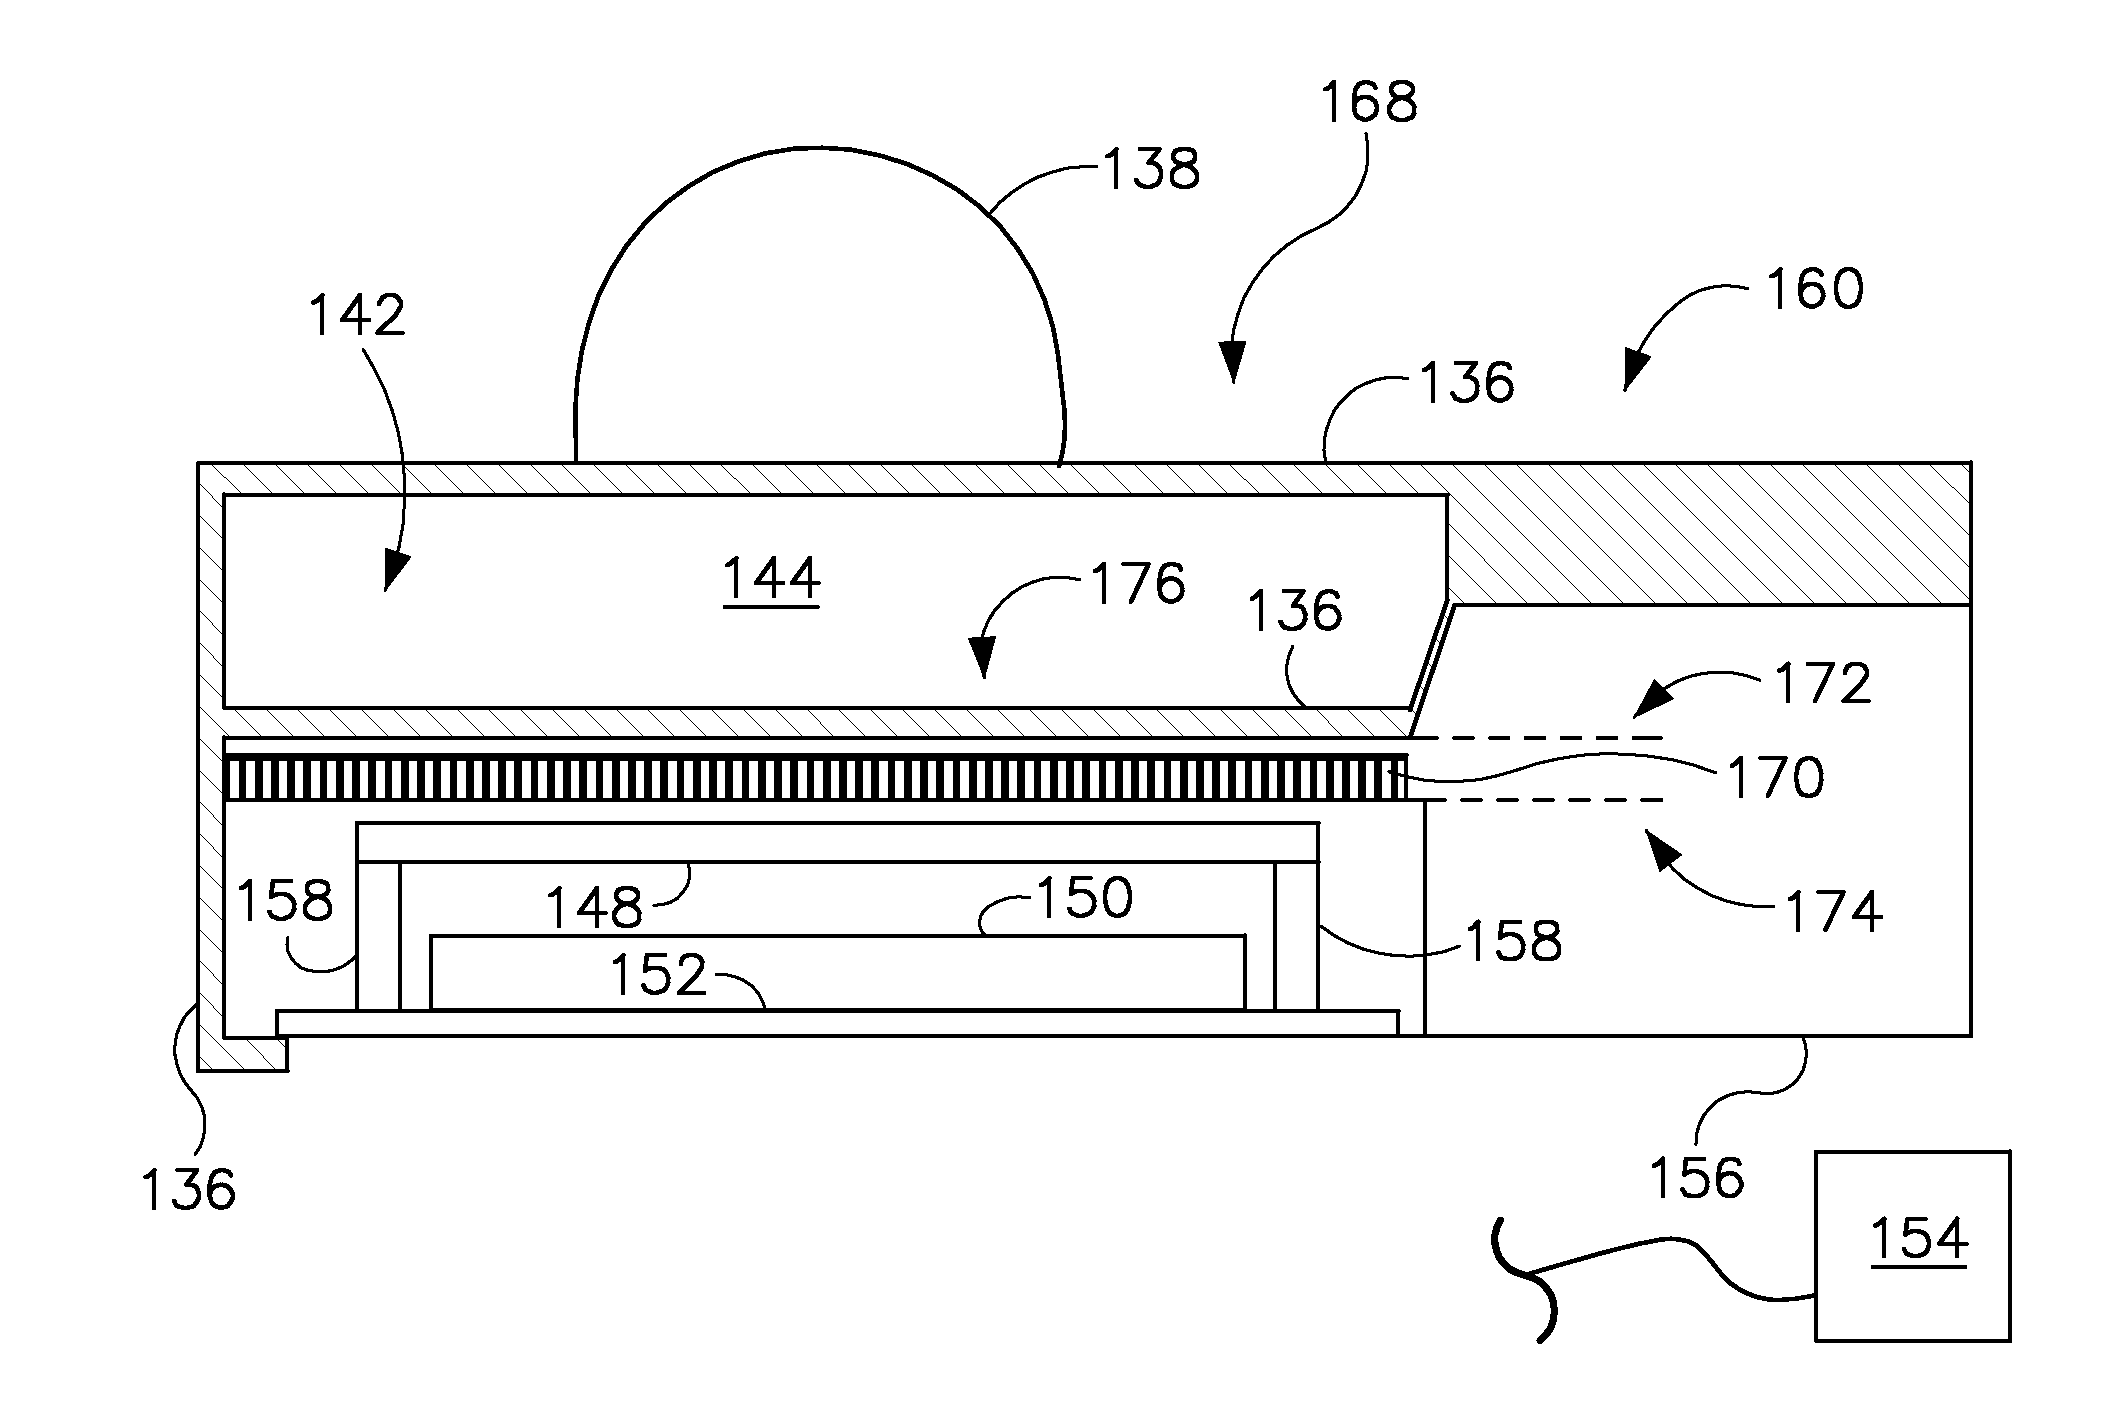 Apparatus for reducing scattered X-ray detection and method of same